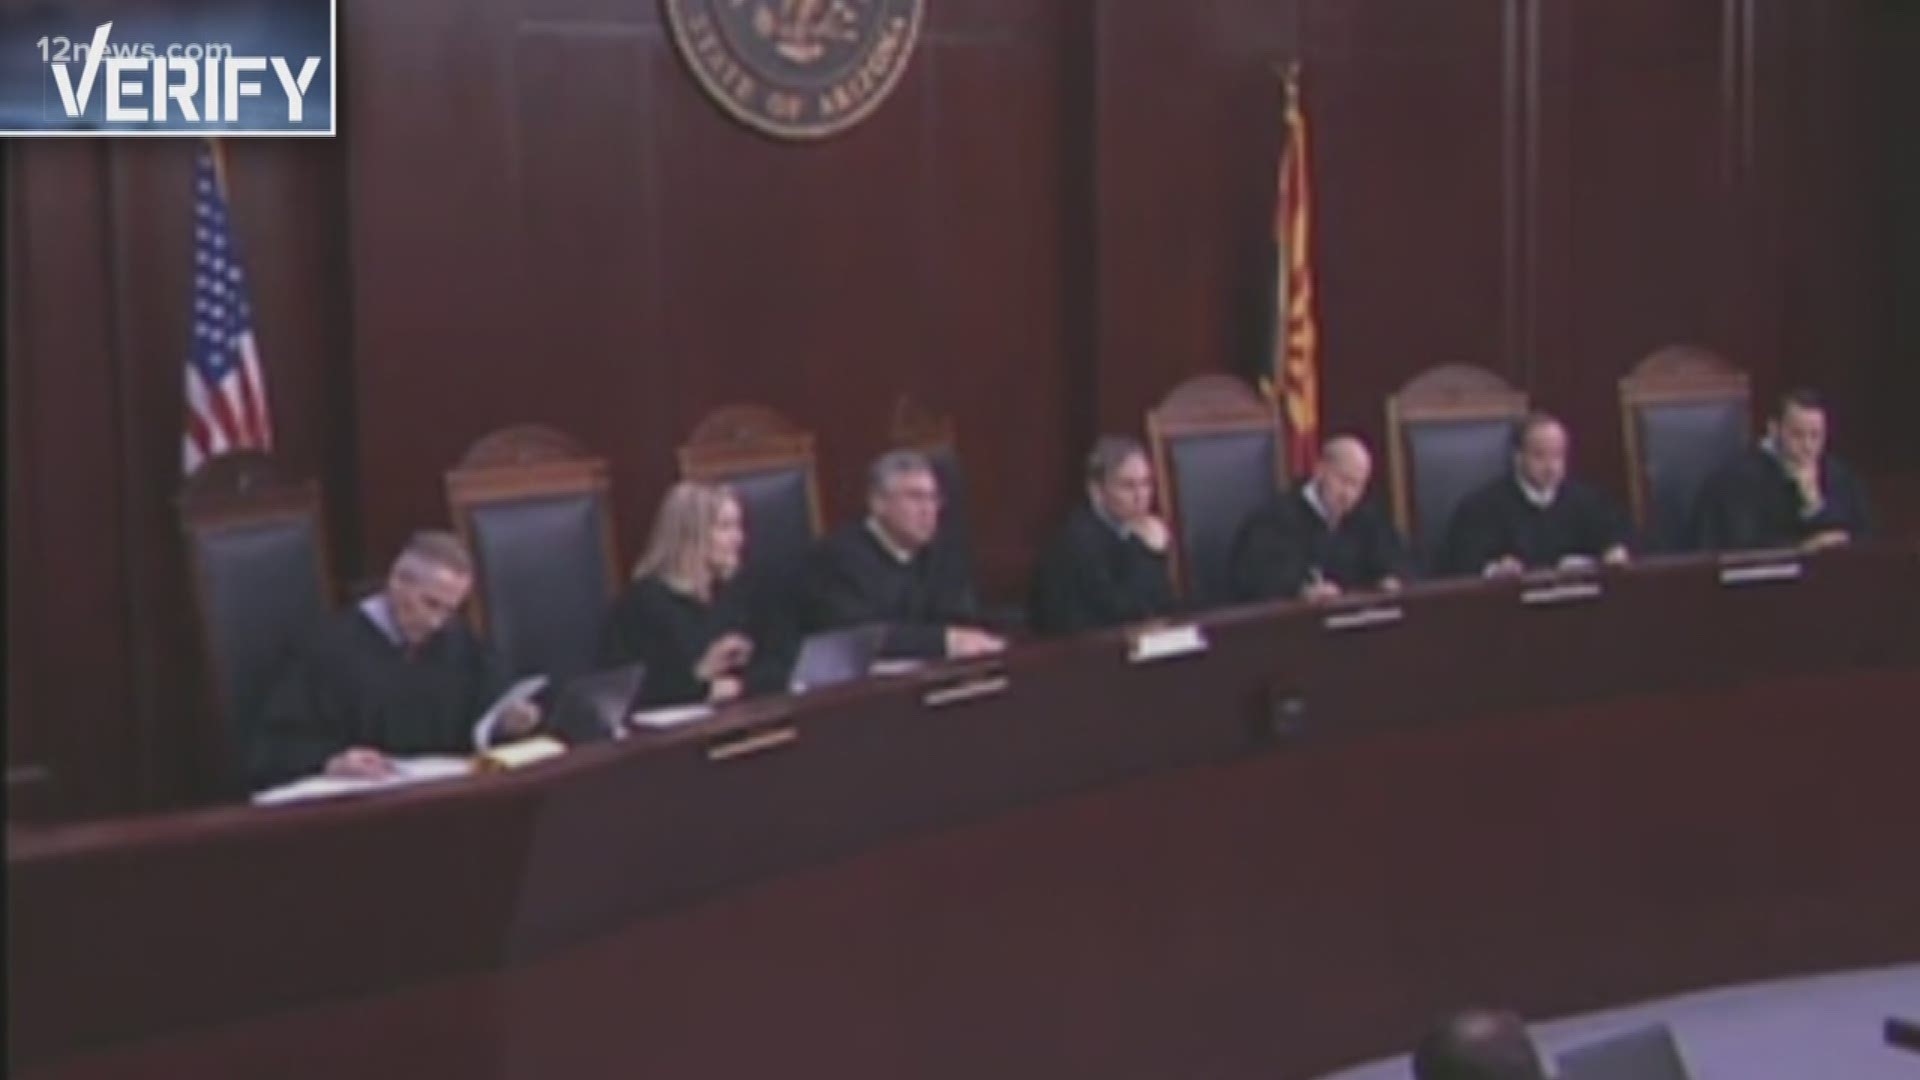 Two women who own a Phoenix business are challenging a Phoenix law that says they cannot discriminate against same-sex couples. Arizona's Supreme Court is now hearing the case. We verify what the law actually says.